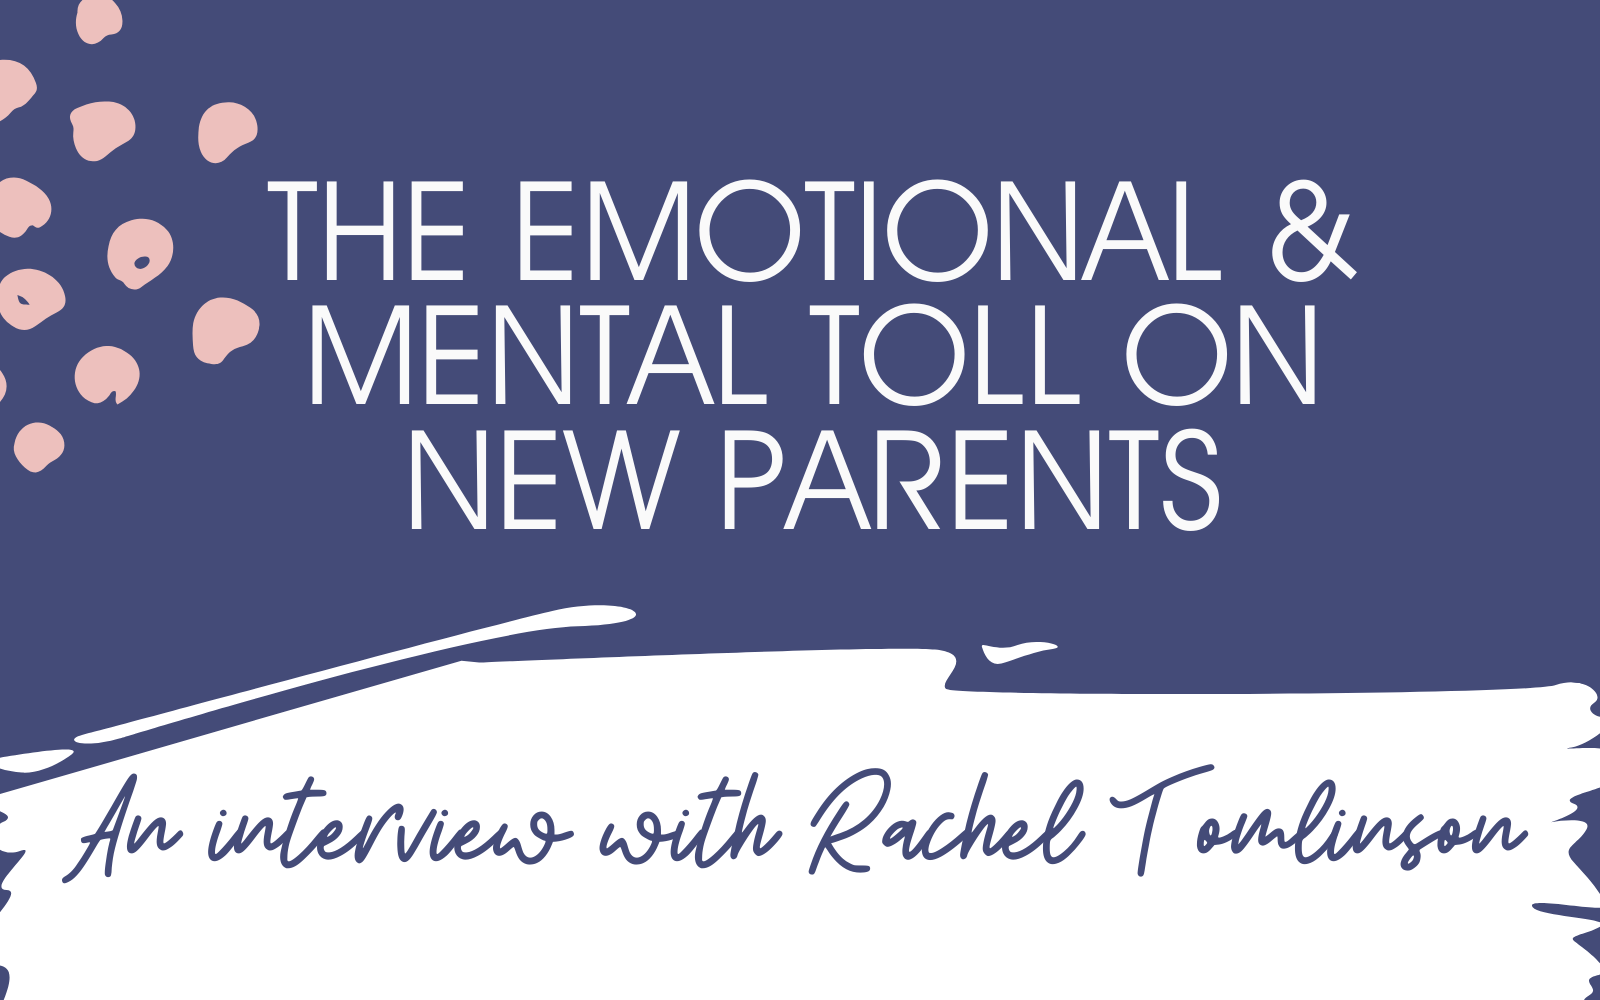 The Emotional Journey of New Parents: an interview with psychologist Rachel Tomlinson